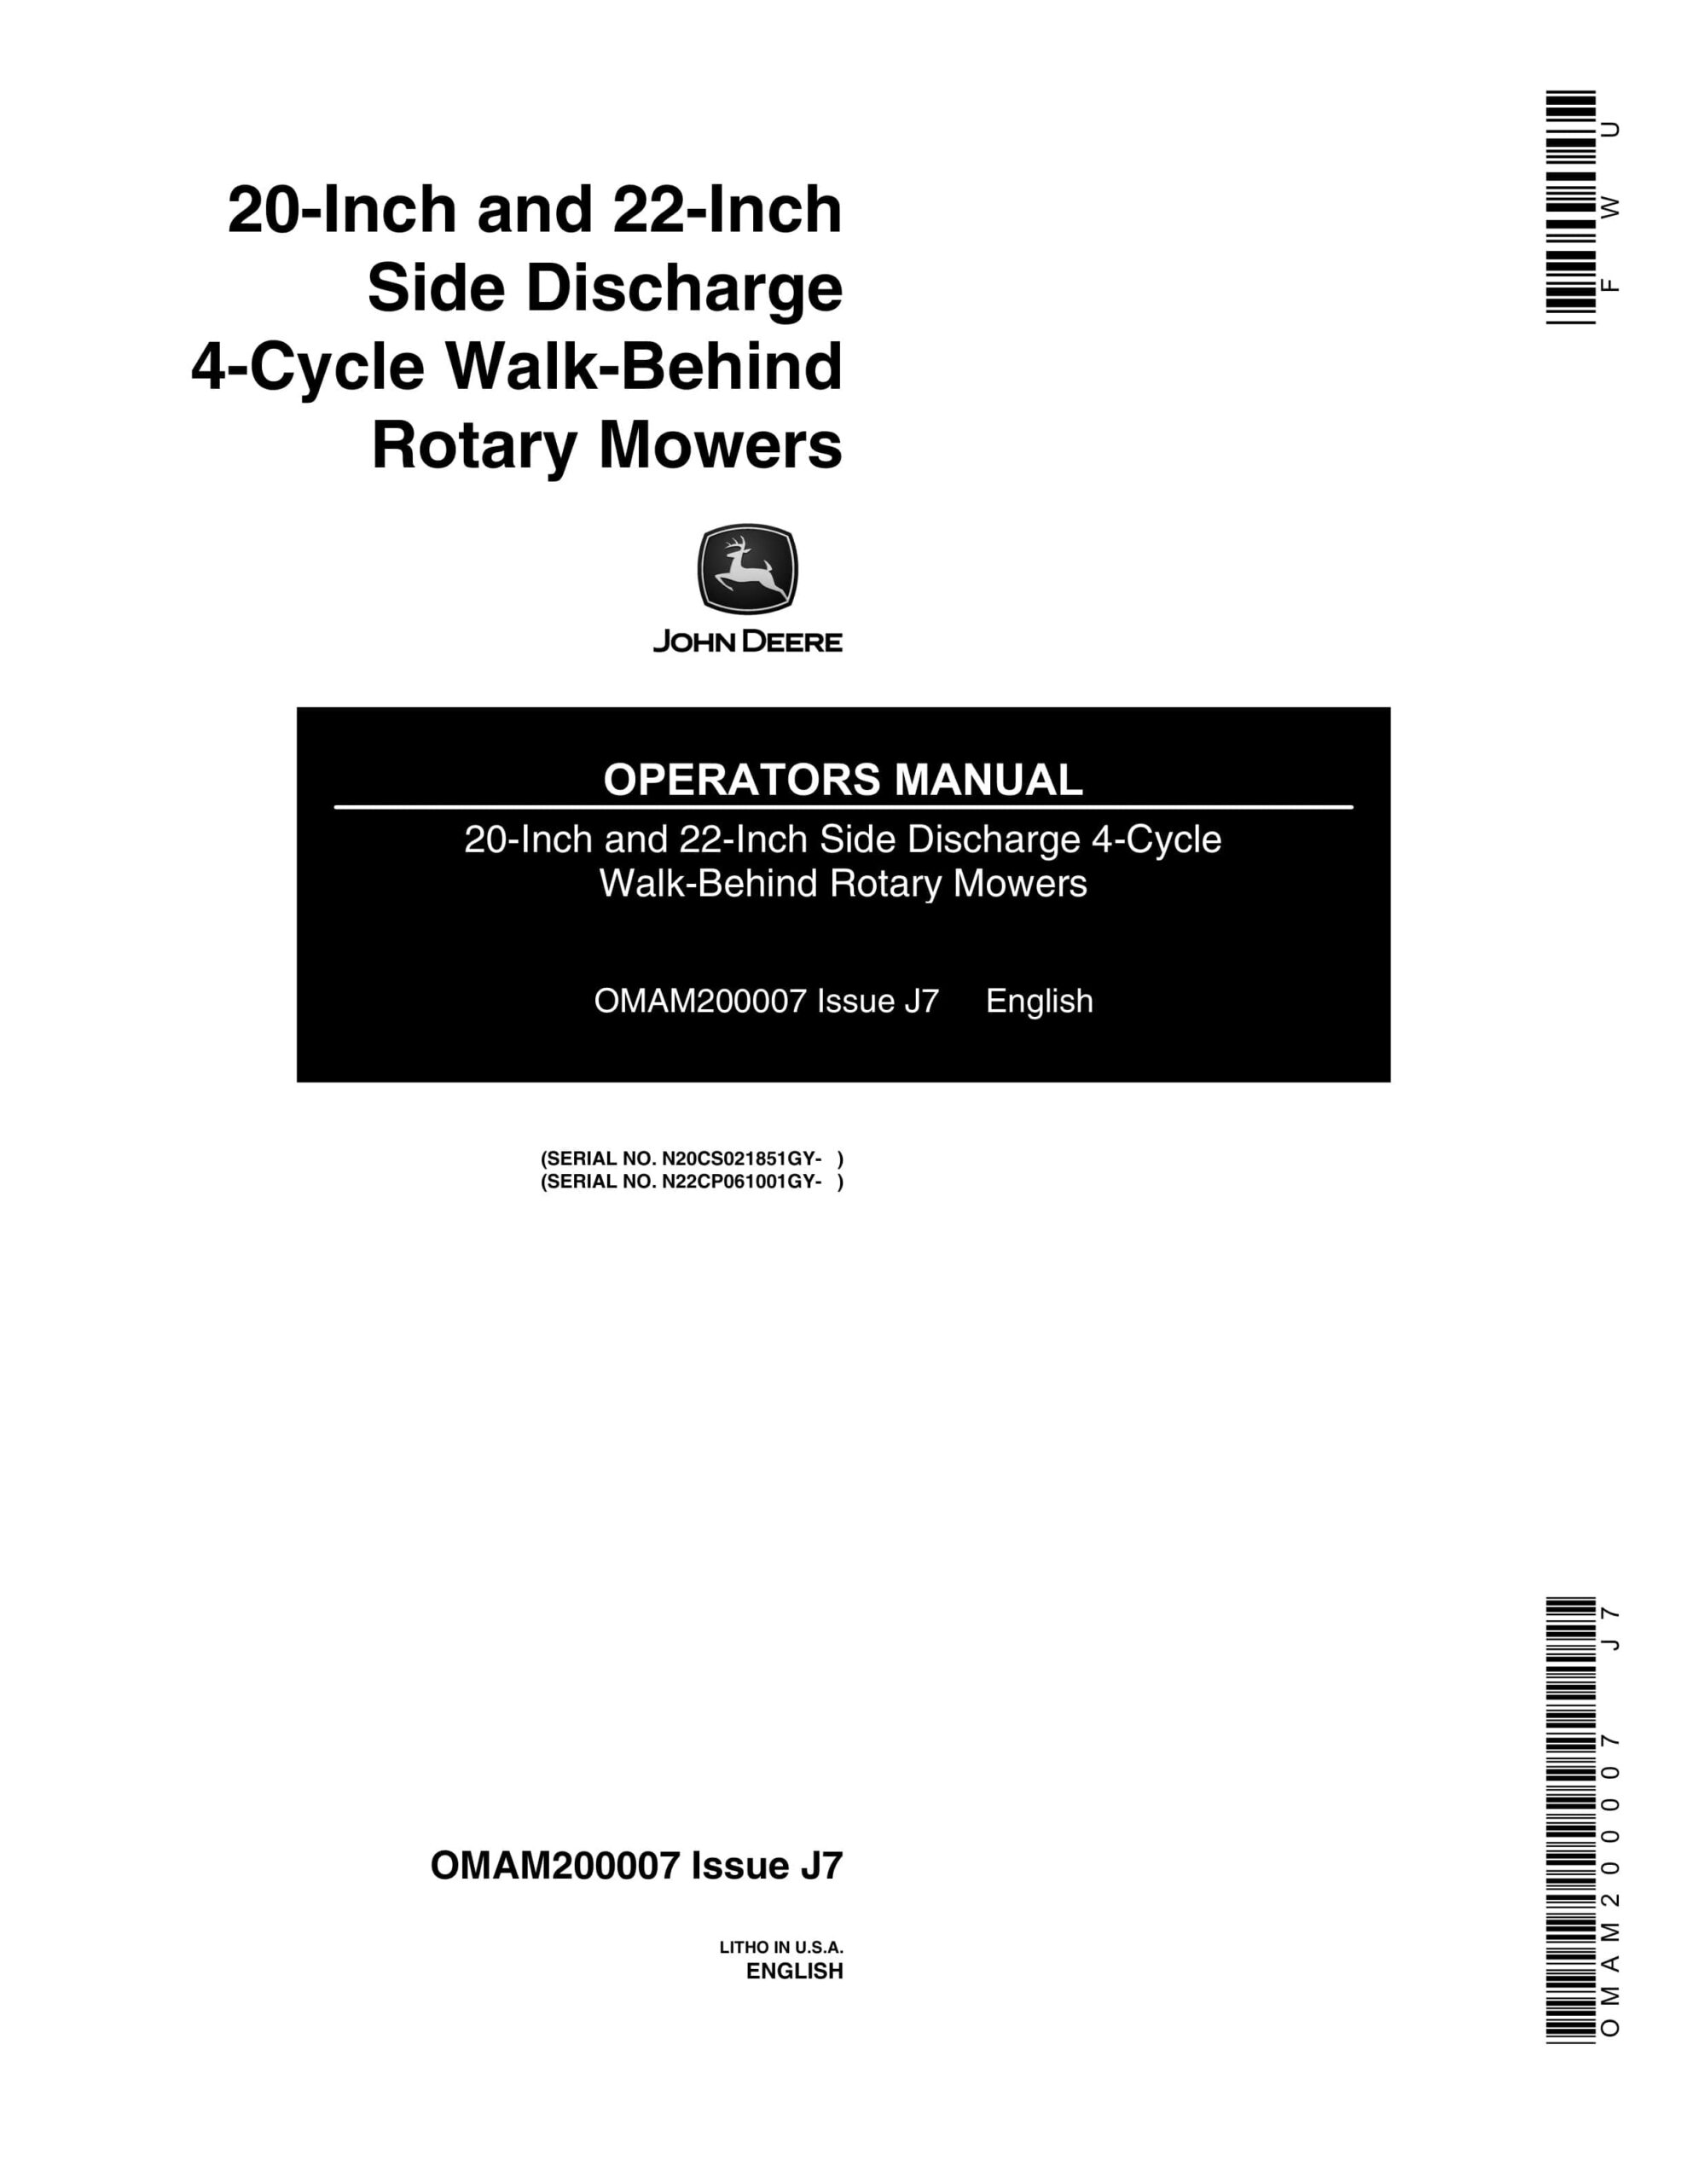 John Deere 20-Inch and 22-Inch Side Discharge 4 Operator Manual OMAM200007-1